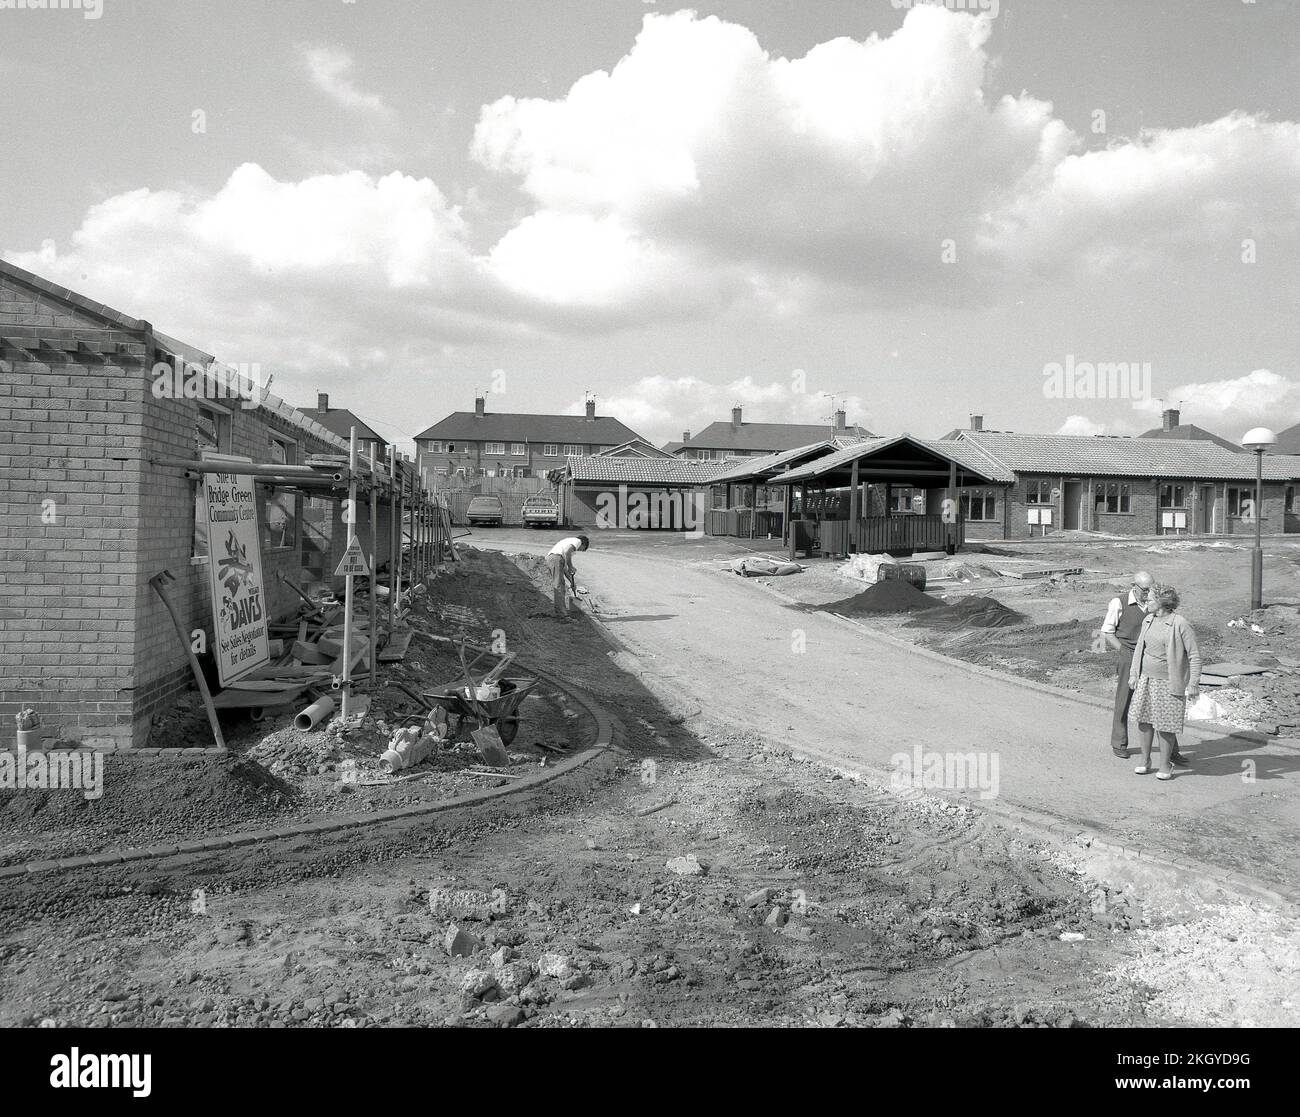 1986, historical, building site, new homes for old people - over 60s - small terraced bungalows and a community centre for the residents, on the left of the picture, being constructed, Nottingham, England, UK. Stock Photo